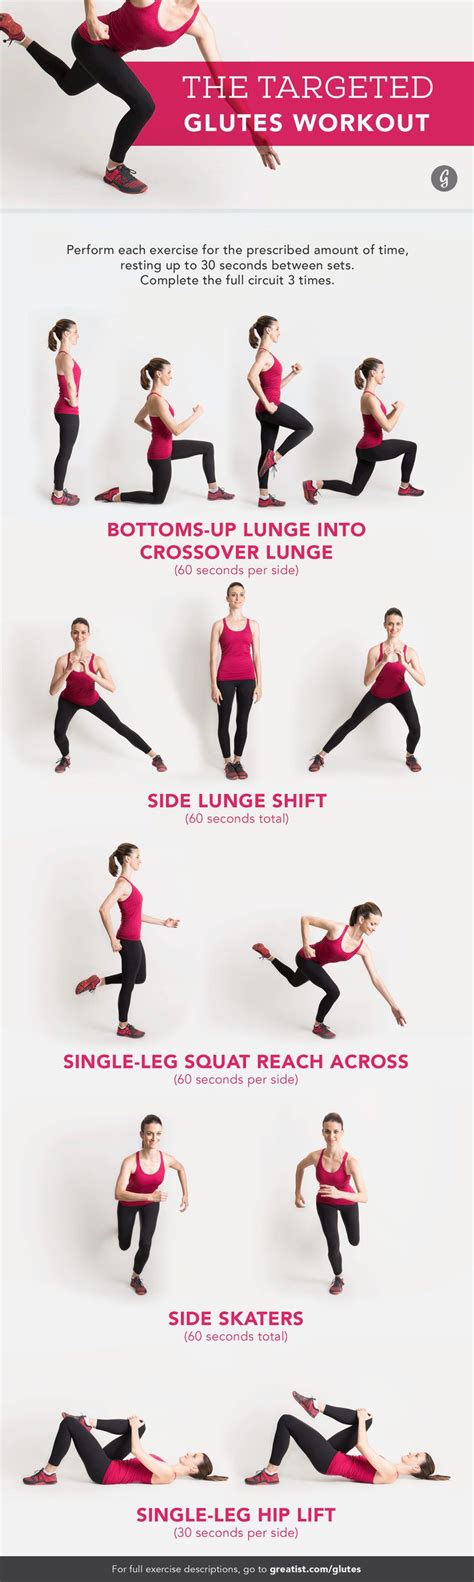 These Exercises Will Work Your Glutes From Every Angle So You Can Jump